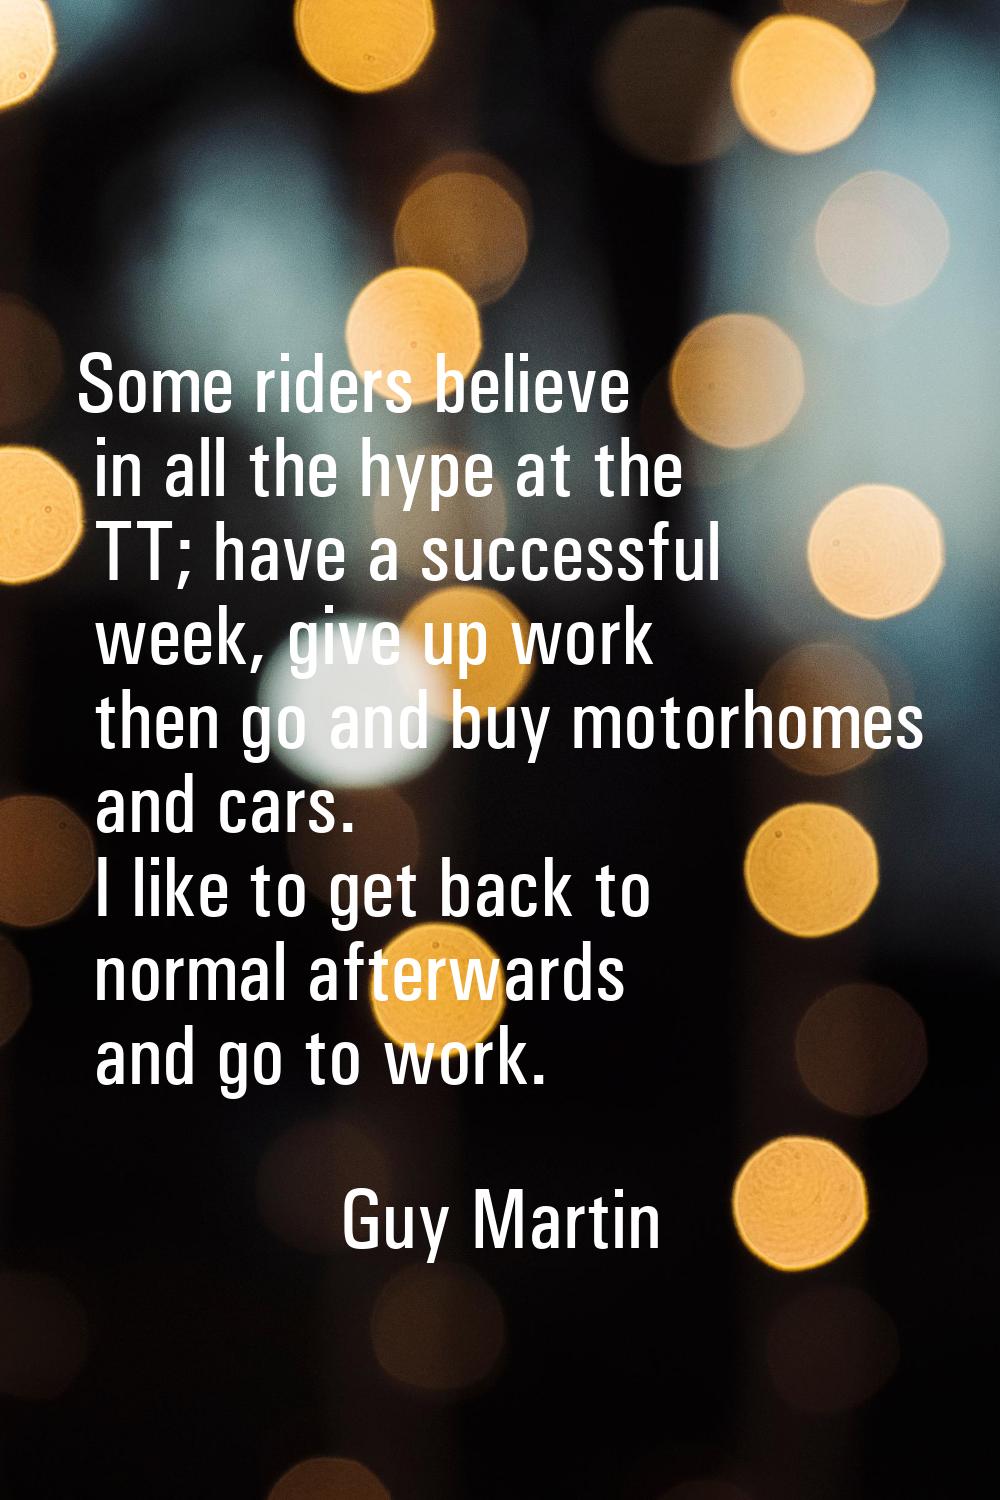 Some riders believe in all the hype at the TT; have a successful week, give up work then go and buy